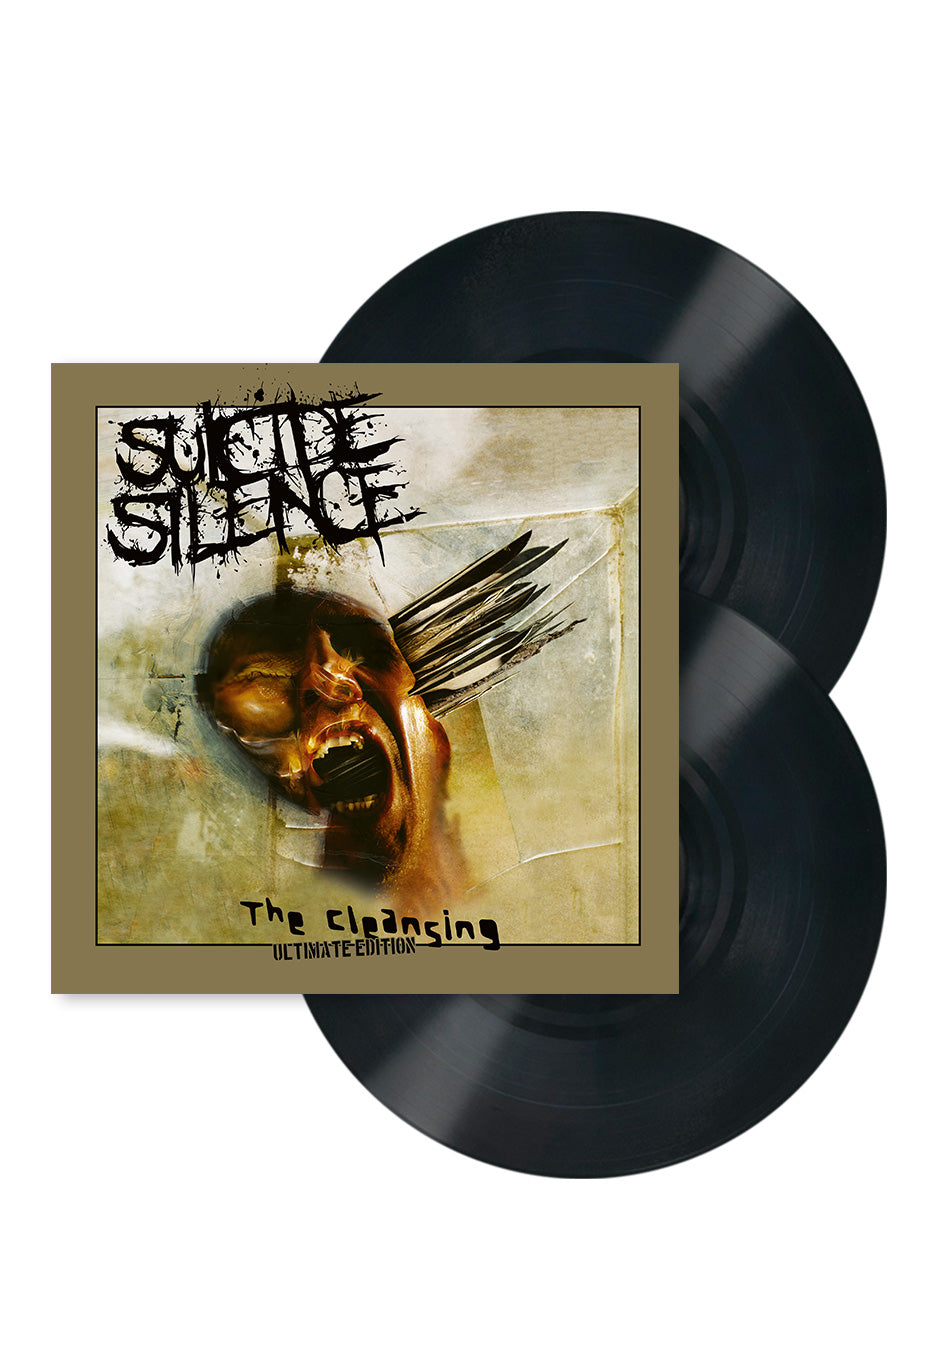 Suicide Silence - The Cleansing (Ultimate Edition) - 2 Vinyl + Poster